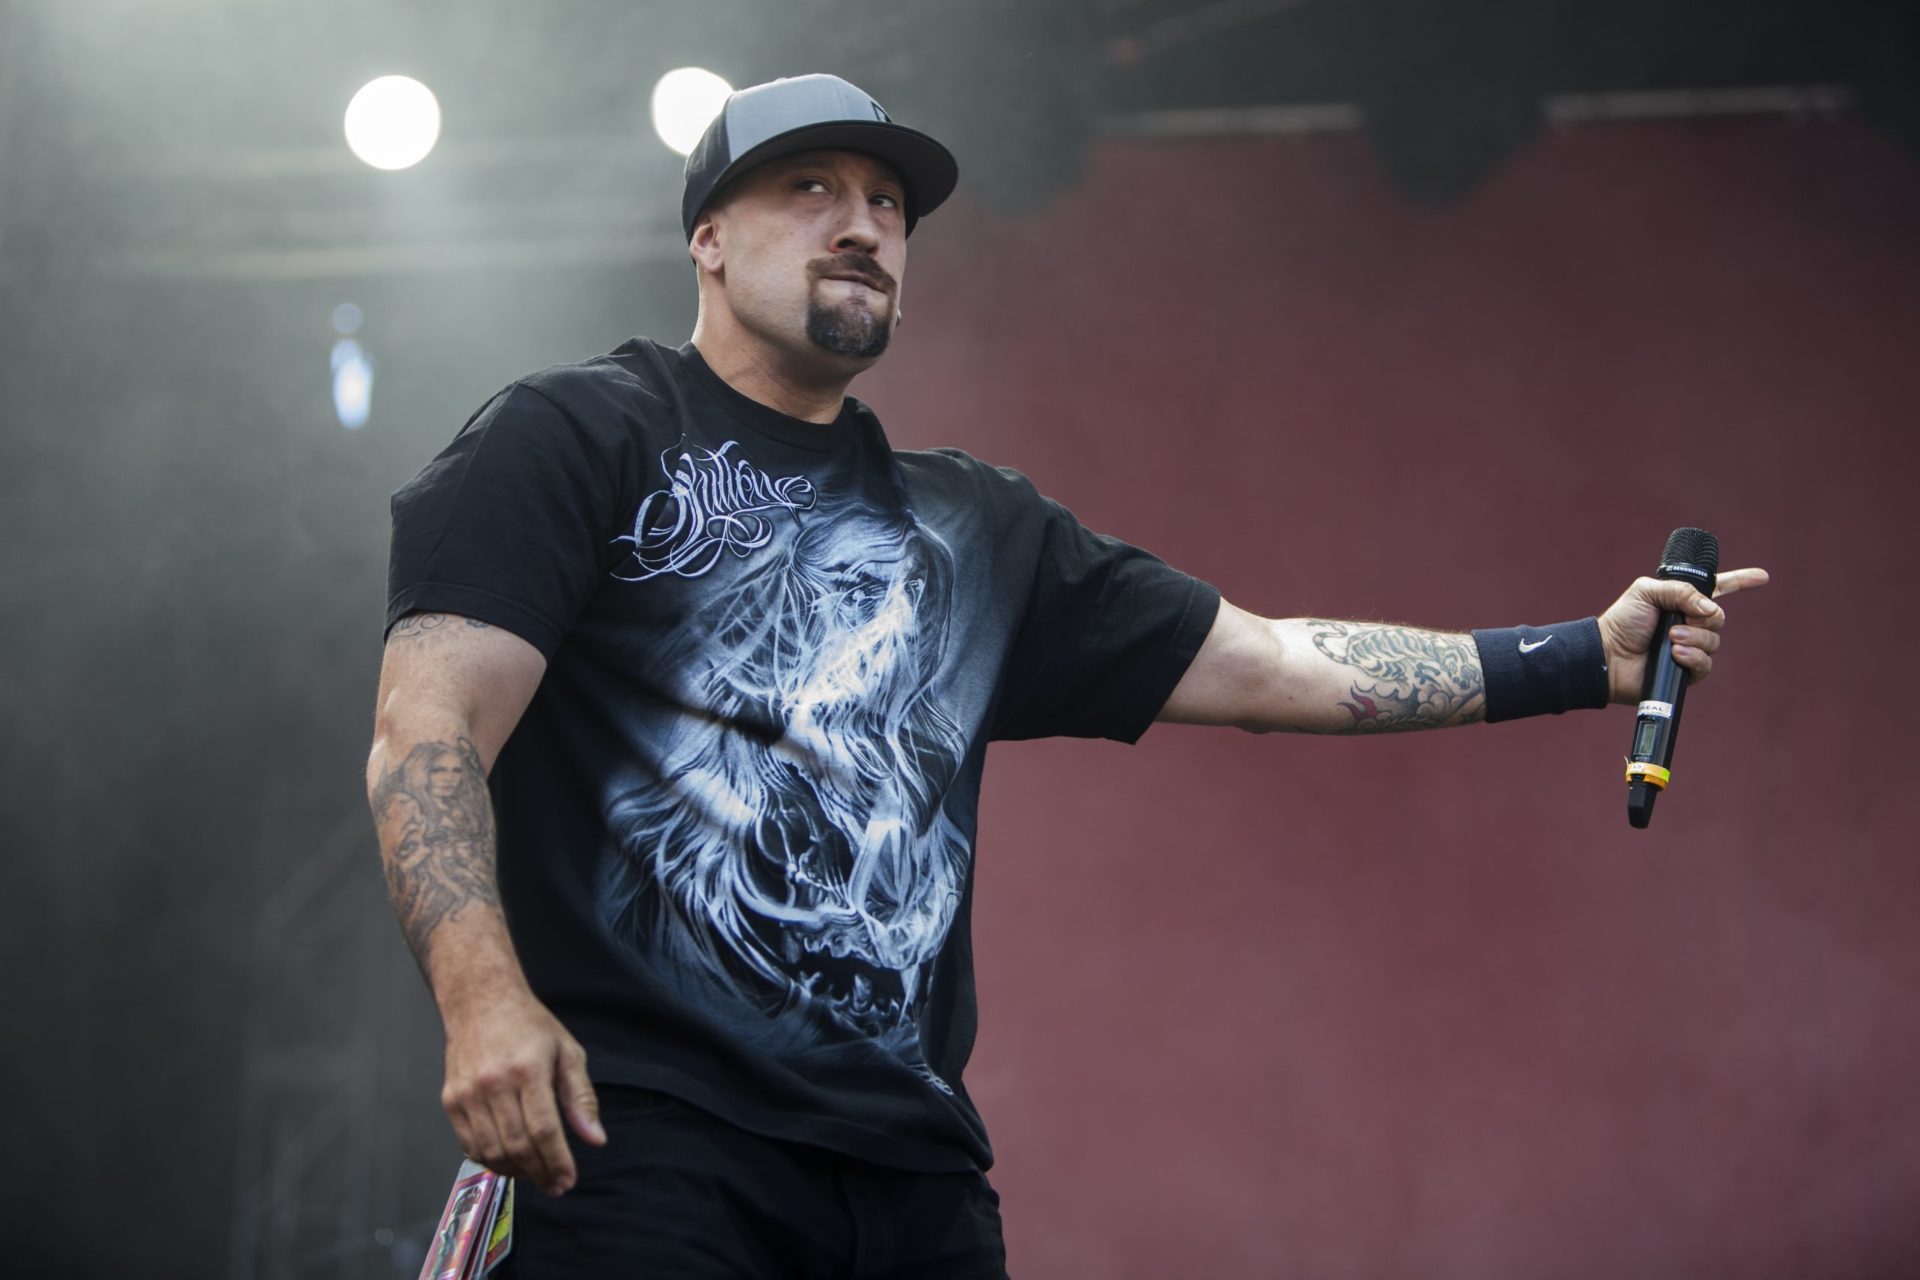 Cypress Hill @ Adelaide Soundwave, March ’13